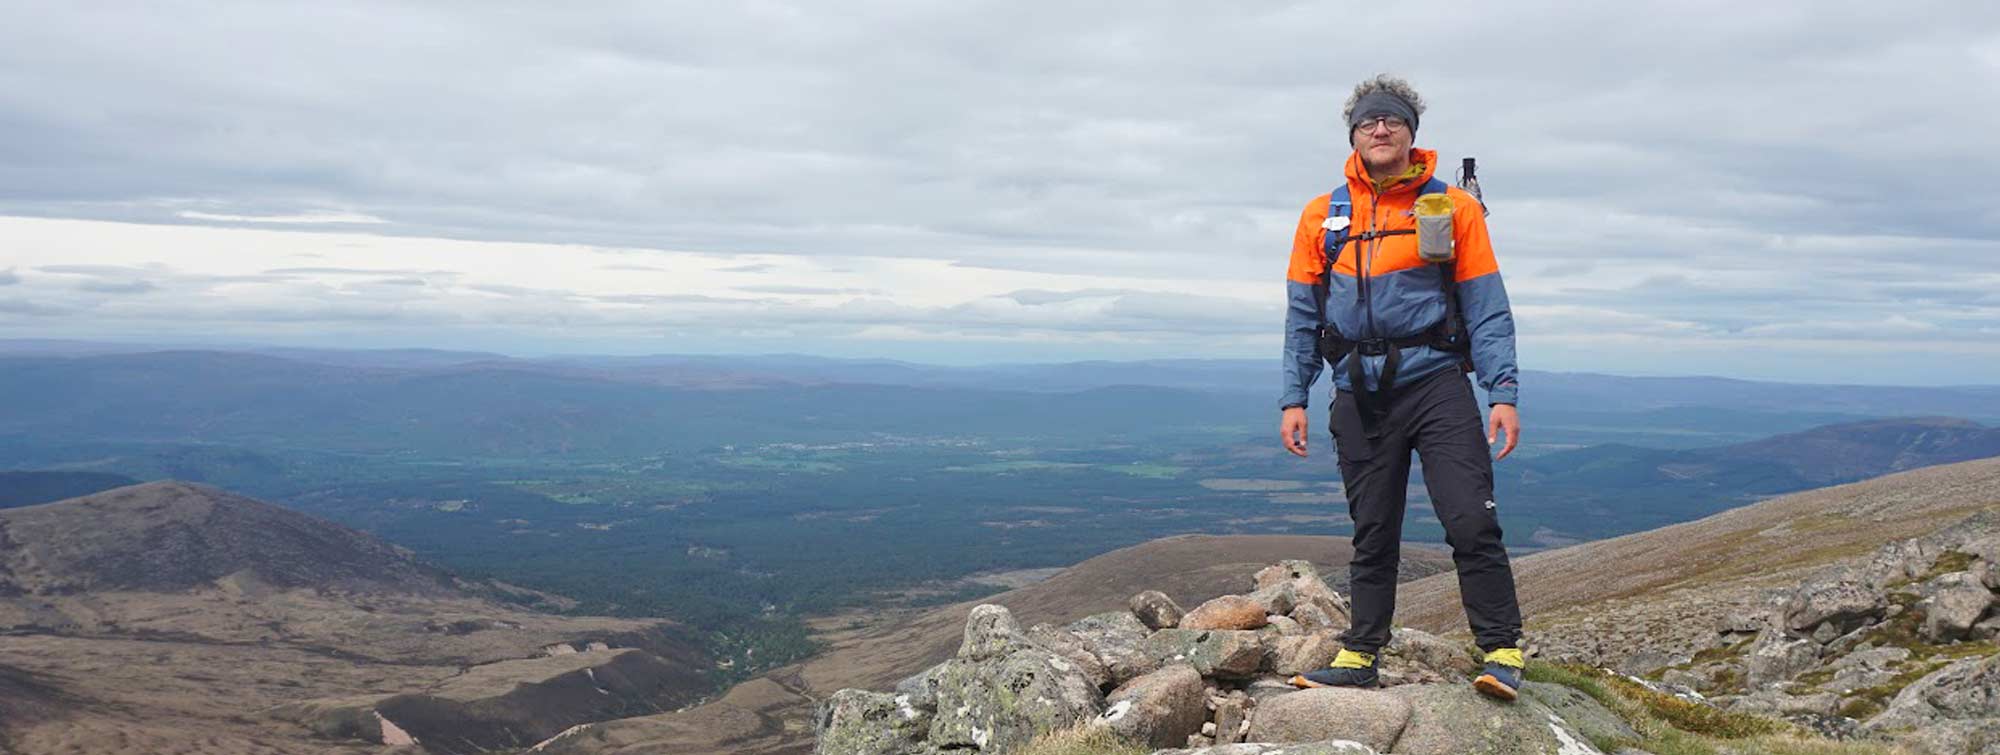 Berghaus Extrem MTN Guide MW Technical Pant Review - “After